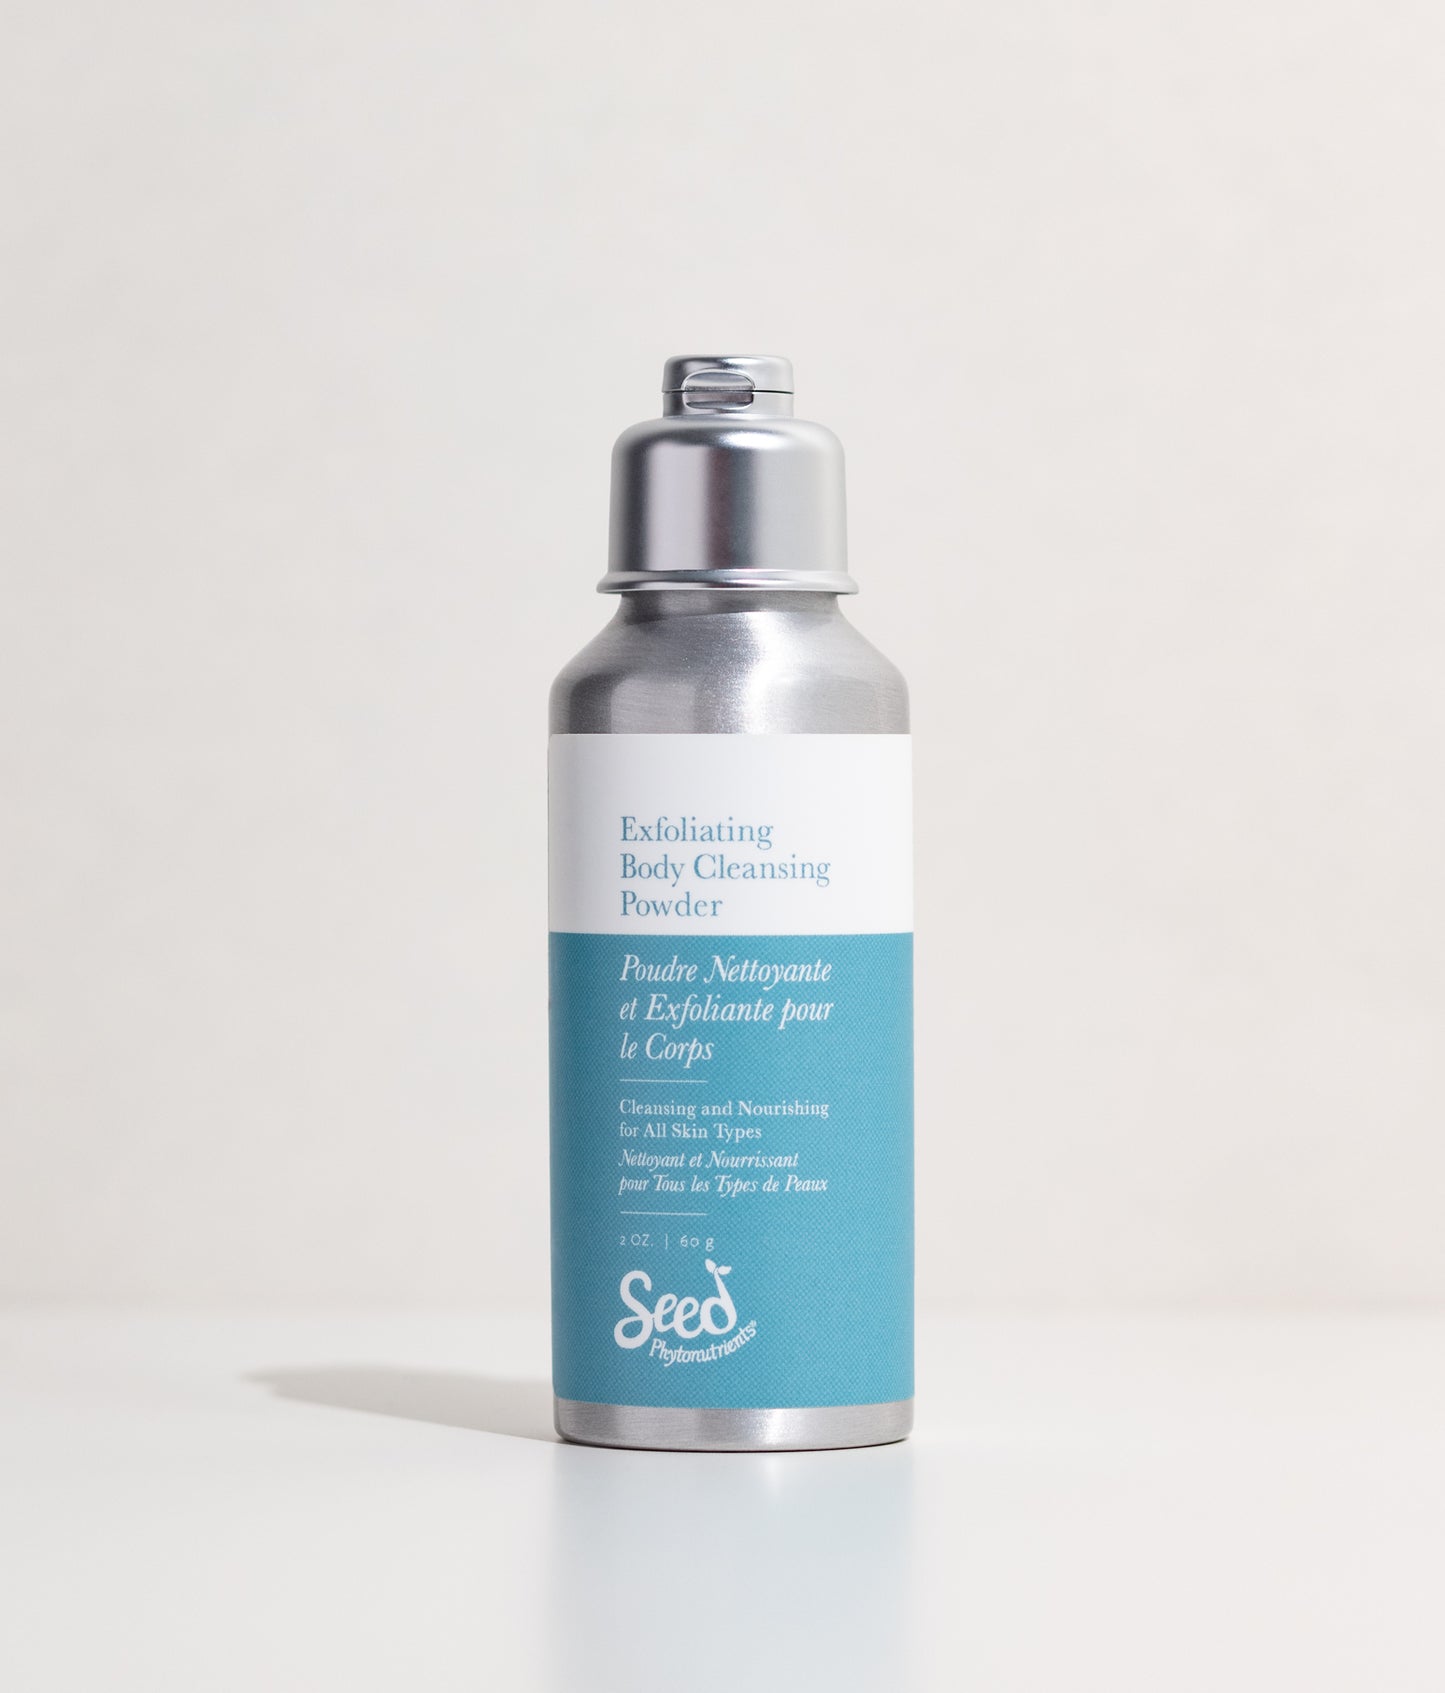 Seed Phytonutrients Exfoliating Body Cleansing Powder